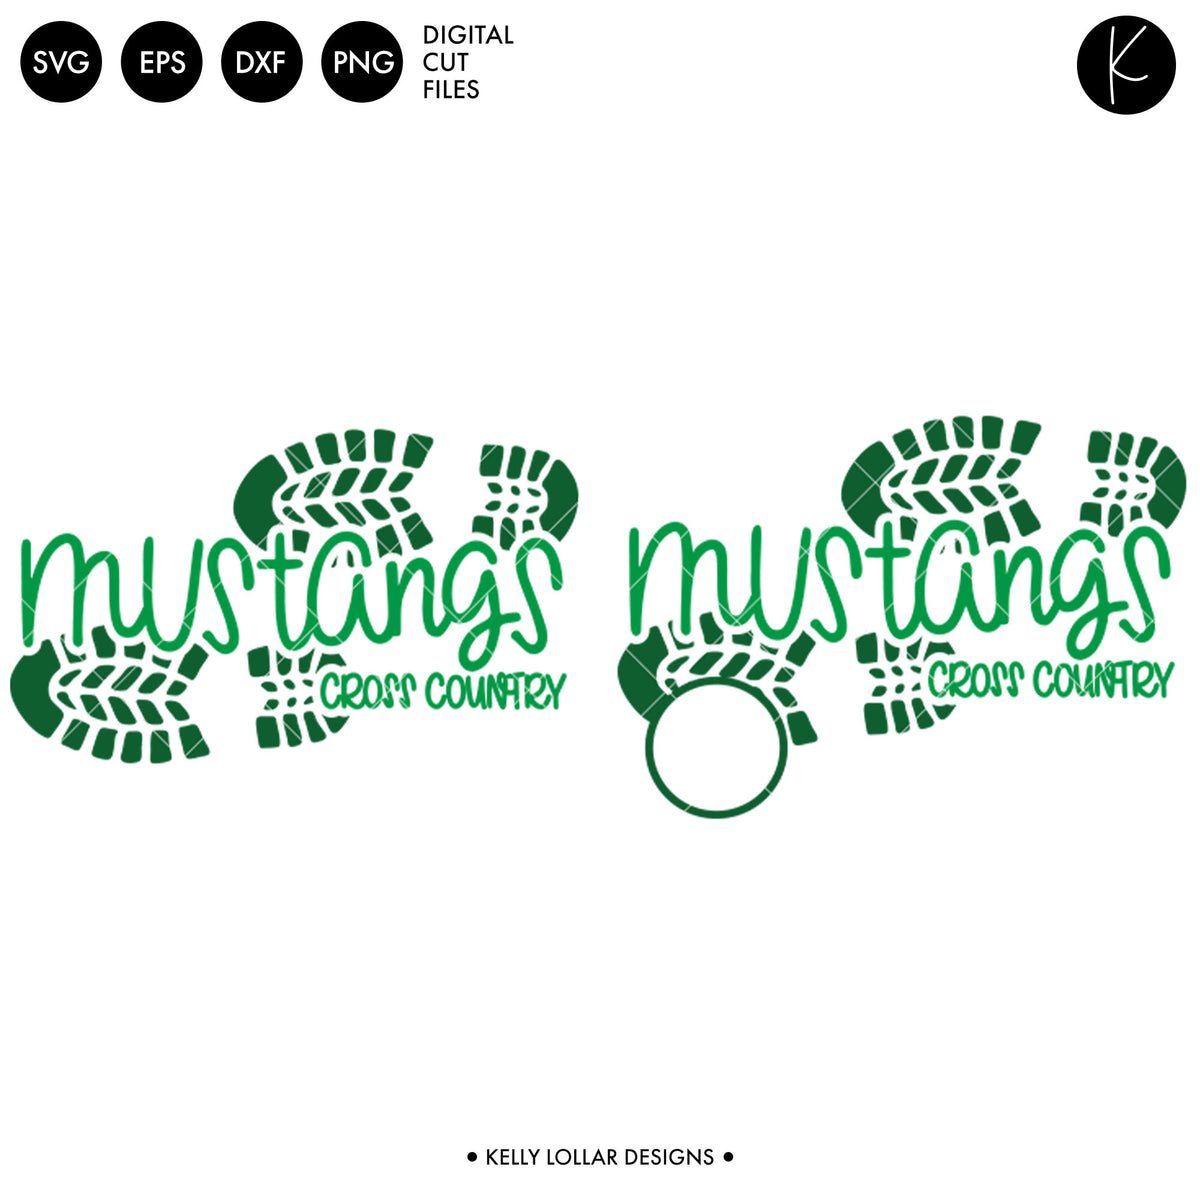 Mustangs Cross Country Bundle | SVG DXF EPS PNG Cut Files